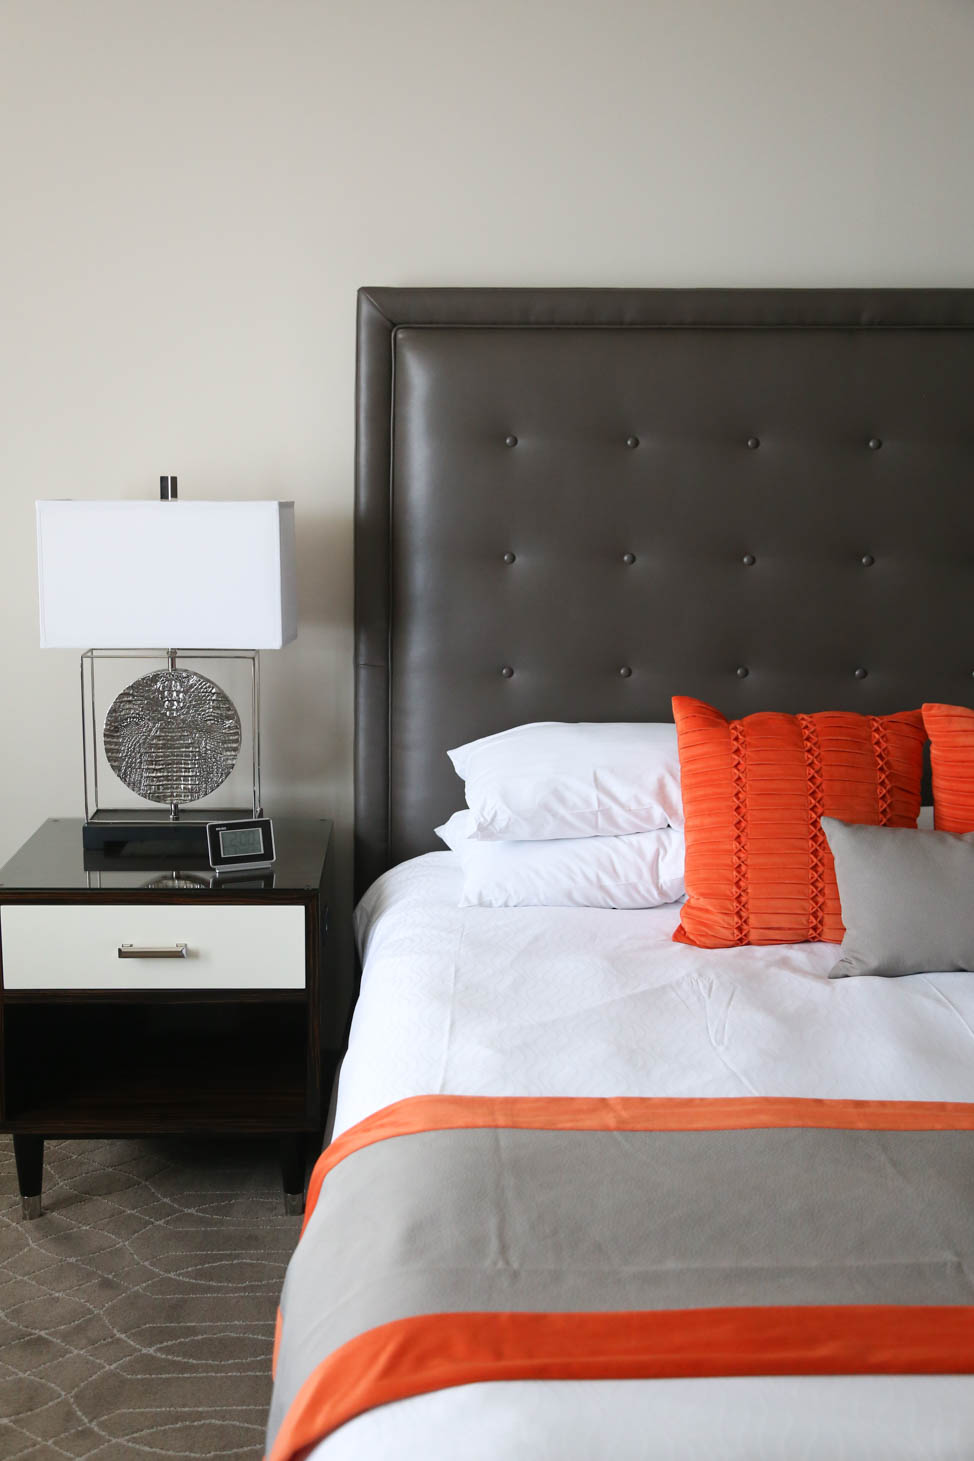 Where to Stay in Oklahoma City: The Colcord Hotel